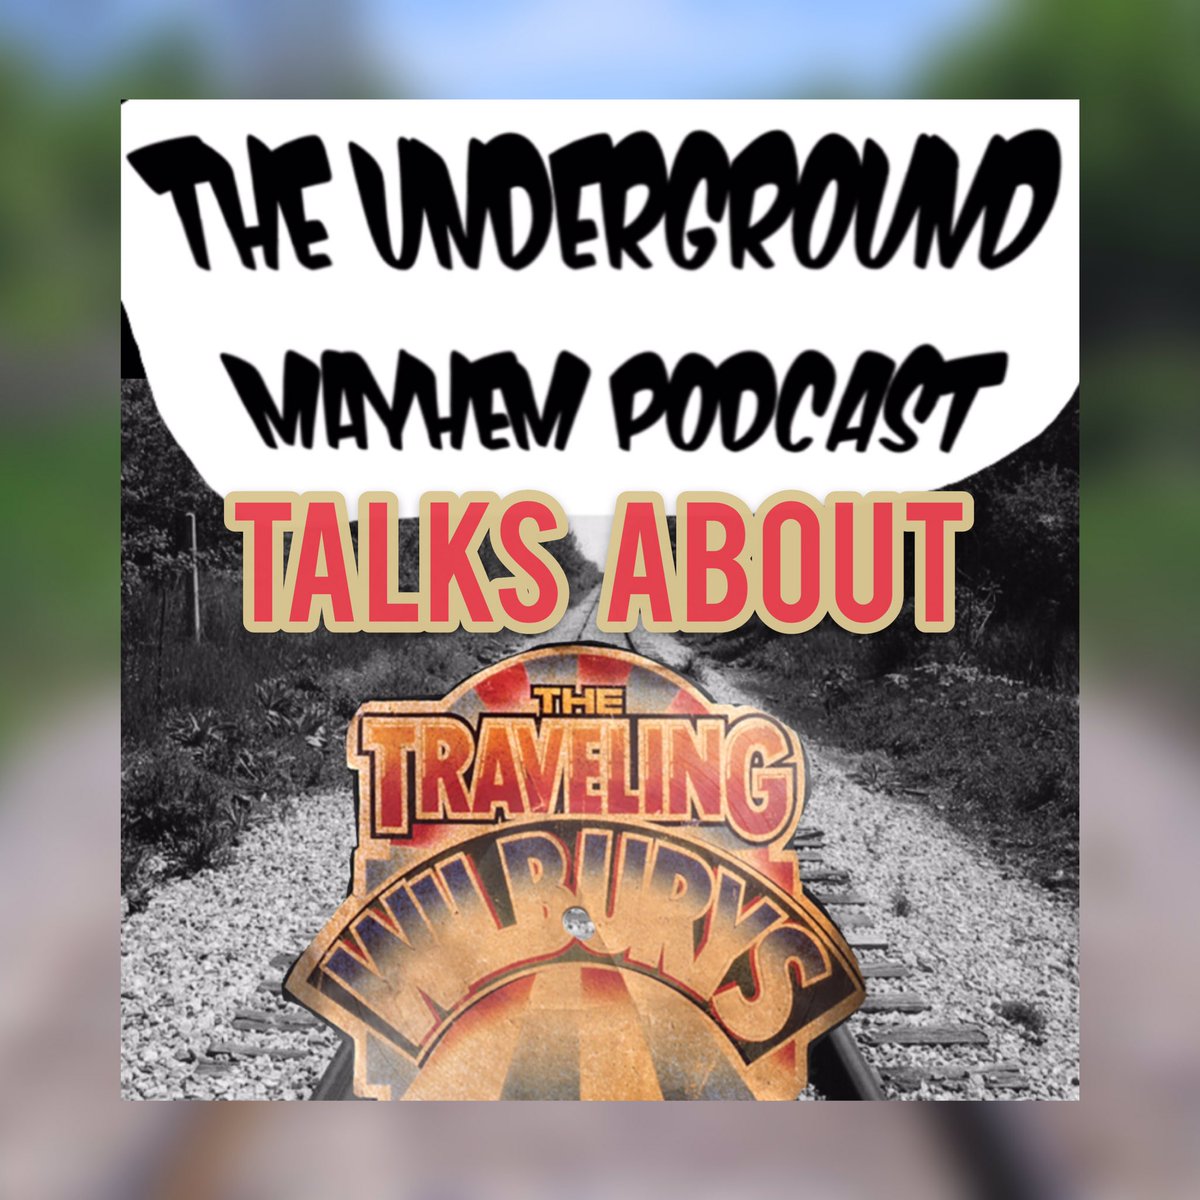 A friend and I debated if #TheTravelingWilburys Influenced a whole generation of shitty #songwtriters.  

#podernfamily #music #album #PodcastFriday 

iTunes itunes.apple.com/us/podcast/fcc…